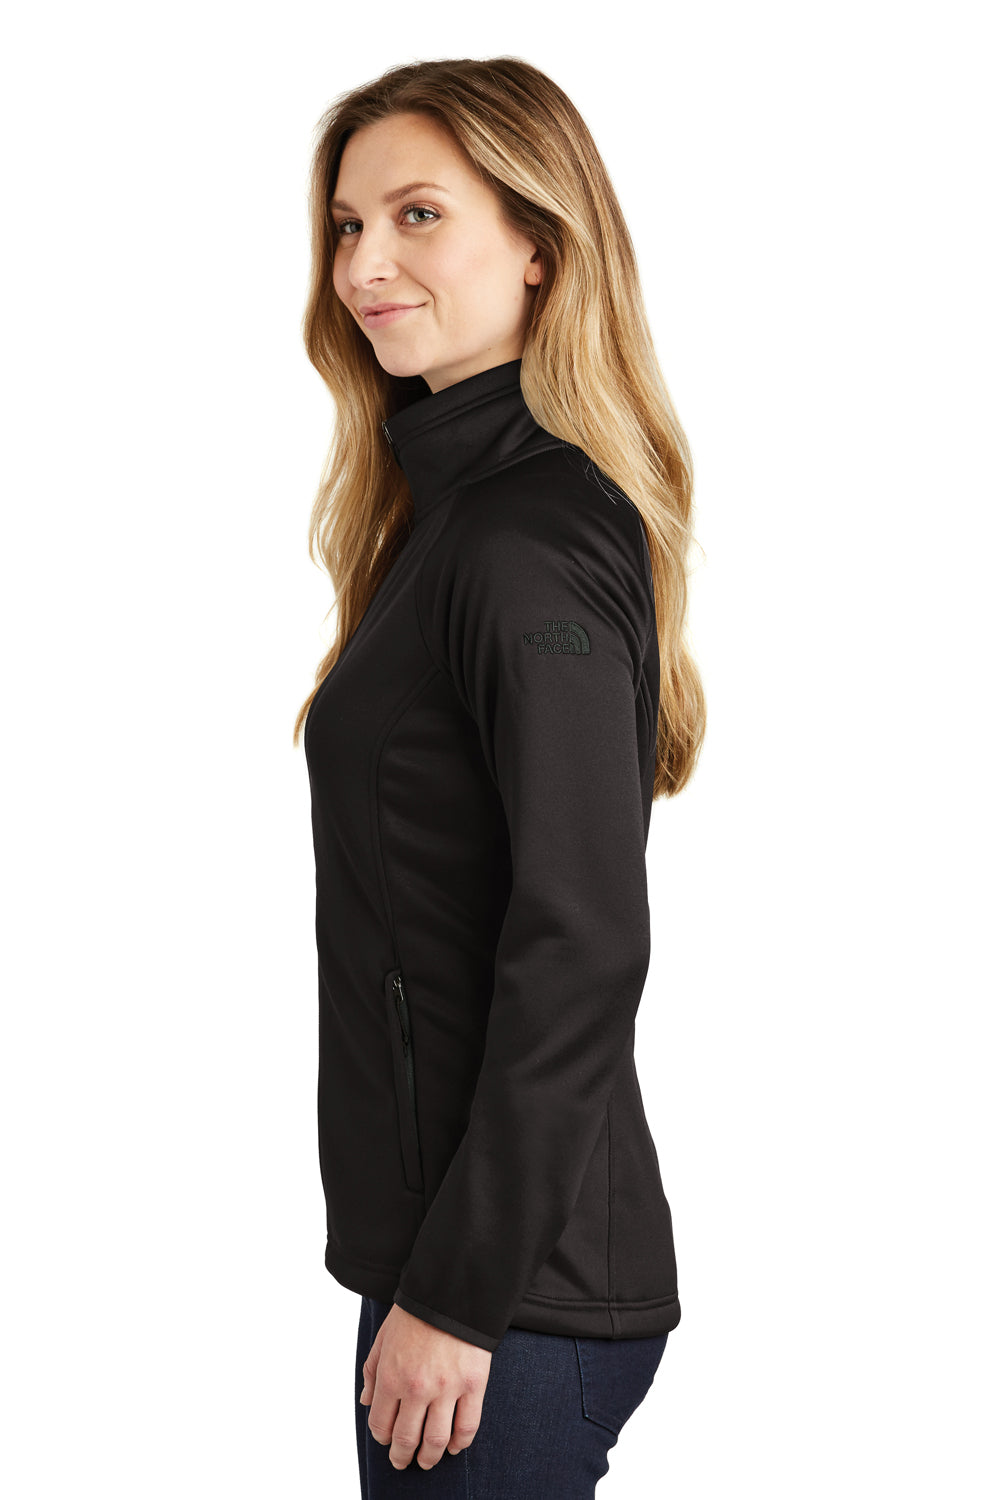 The North Face NF0A3LHA Womens Canyon Flats Full Zip Fleece Jacket Black Side